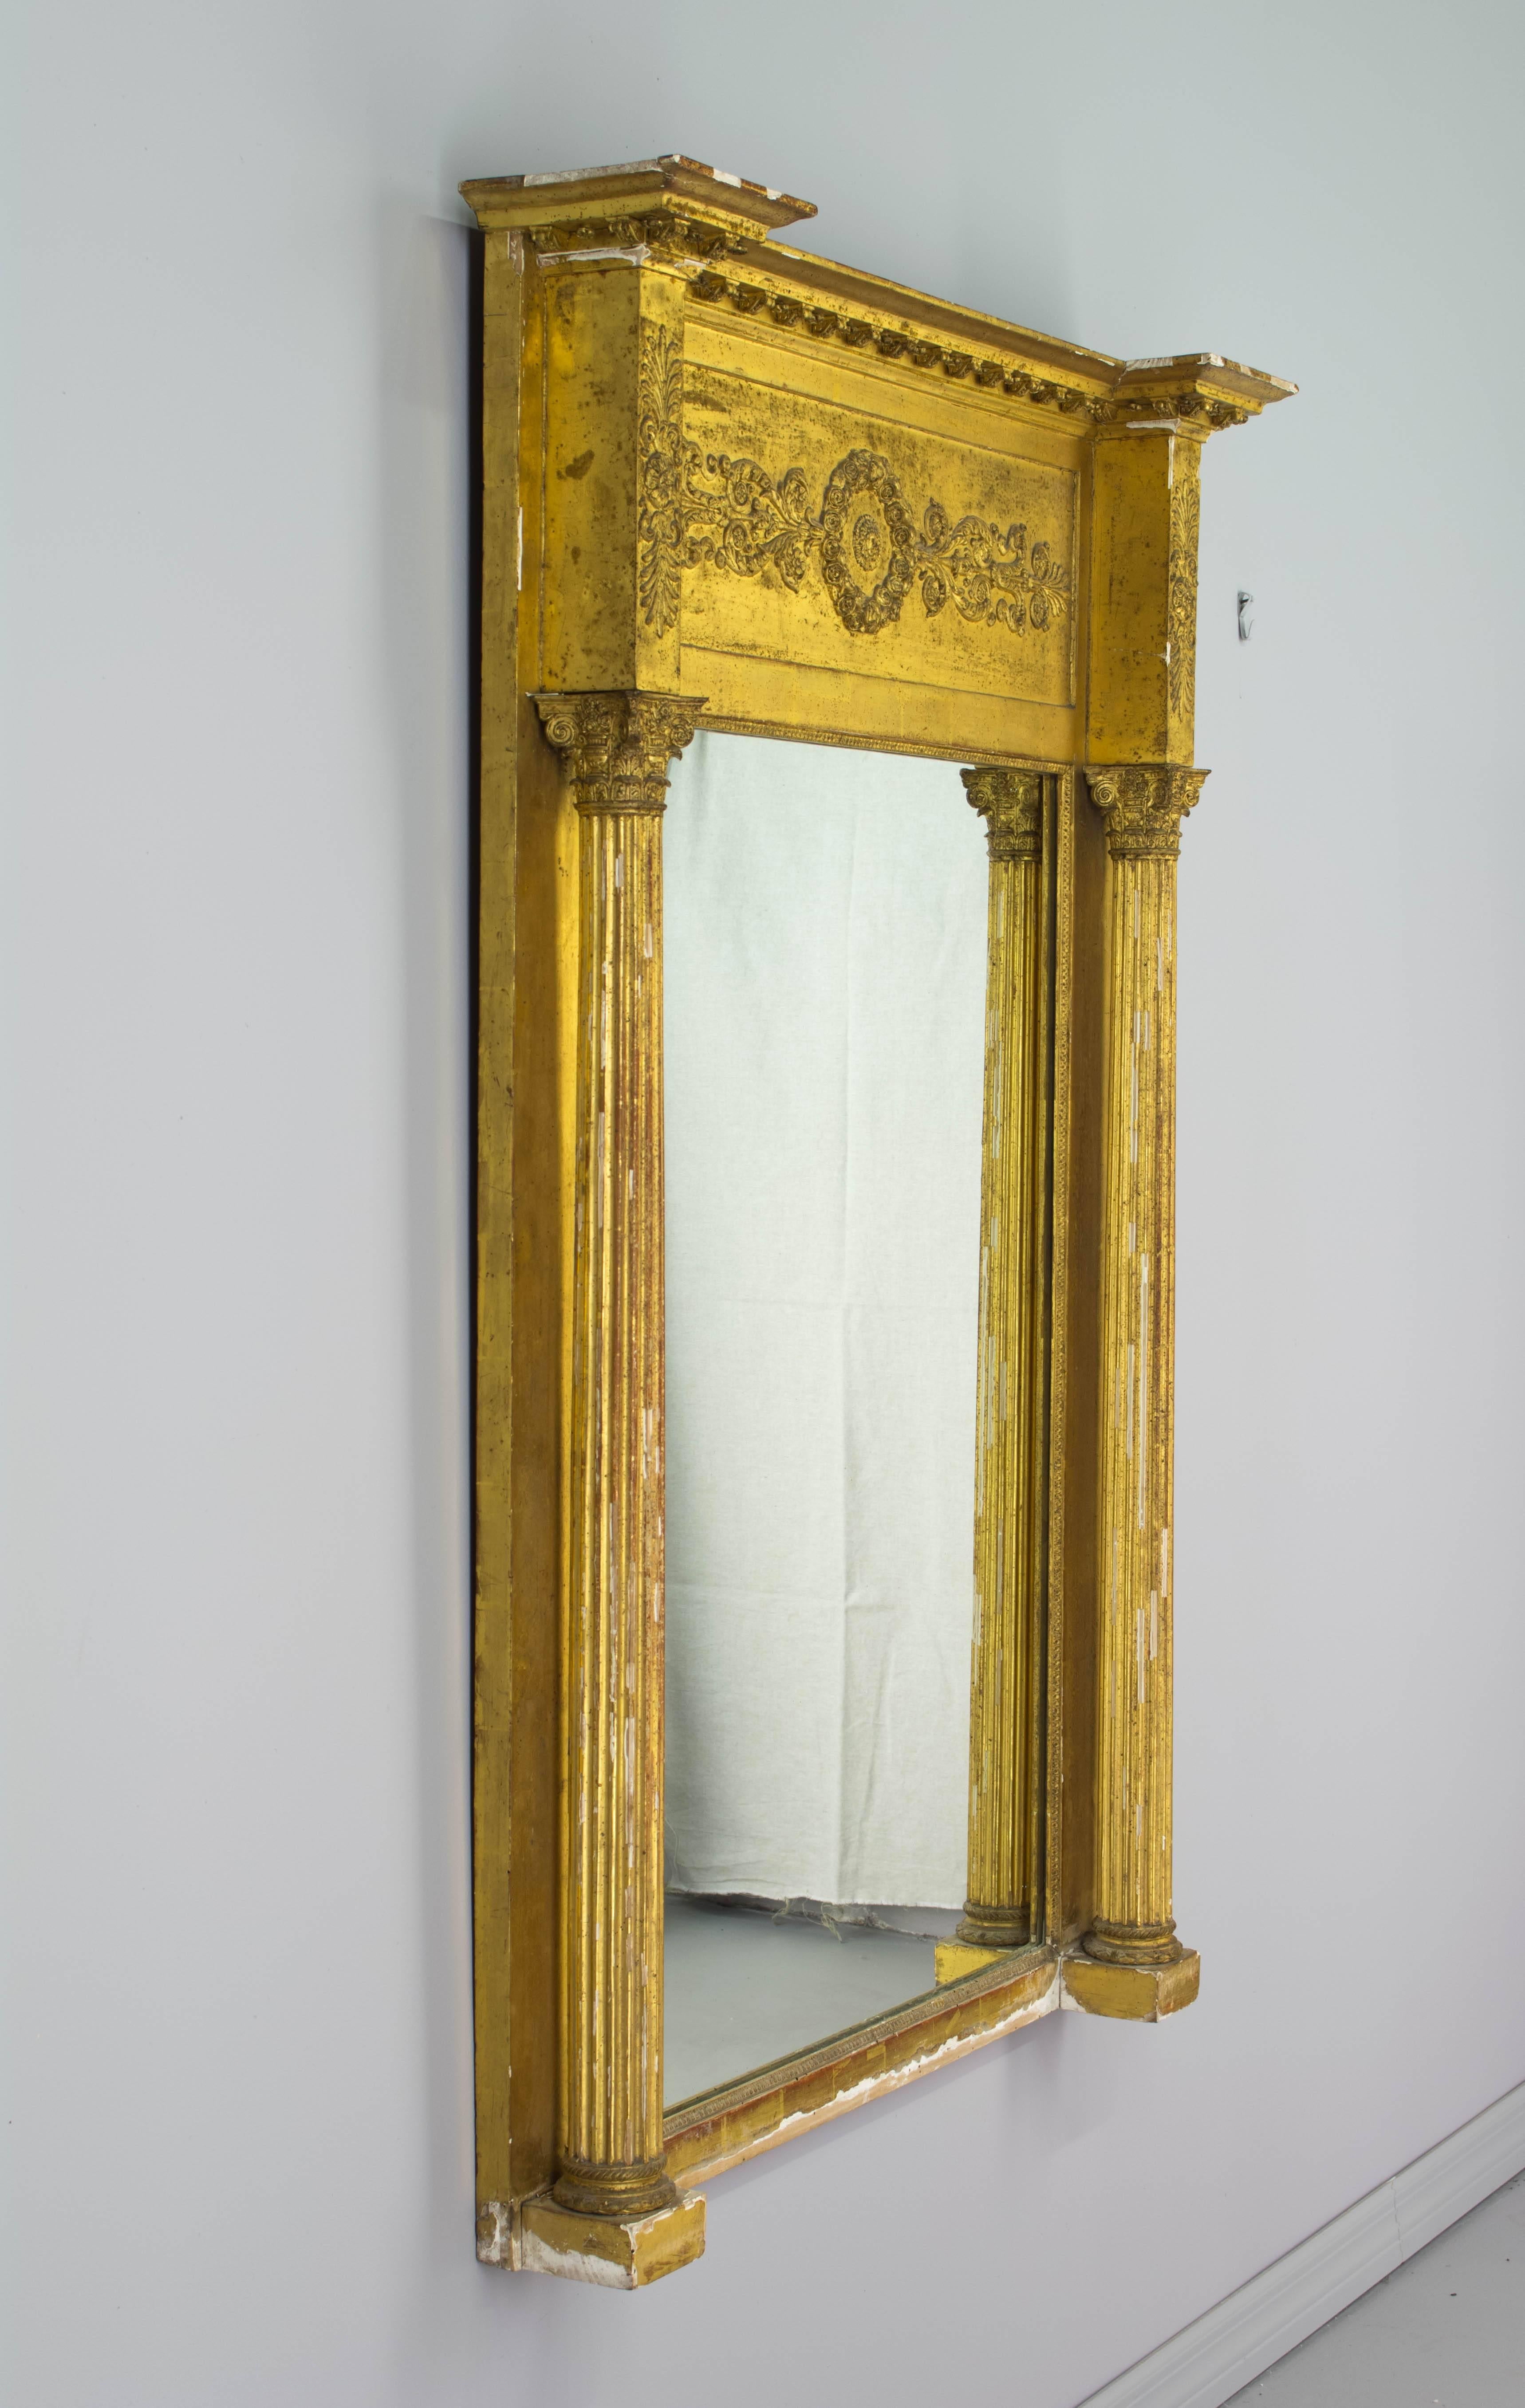 19th century French Empire style gilded mirror. Architectural frame with three dimensional Corinthian columns, a frieze decorated in low relief and capped with a dentil molding. Original mirror. Original gilt is bright, but there are losses